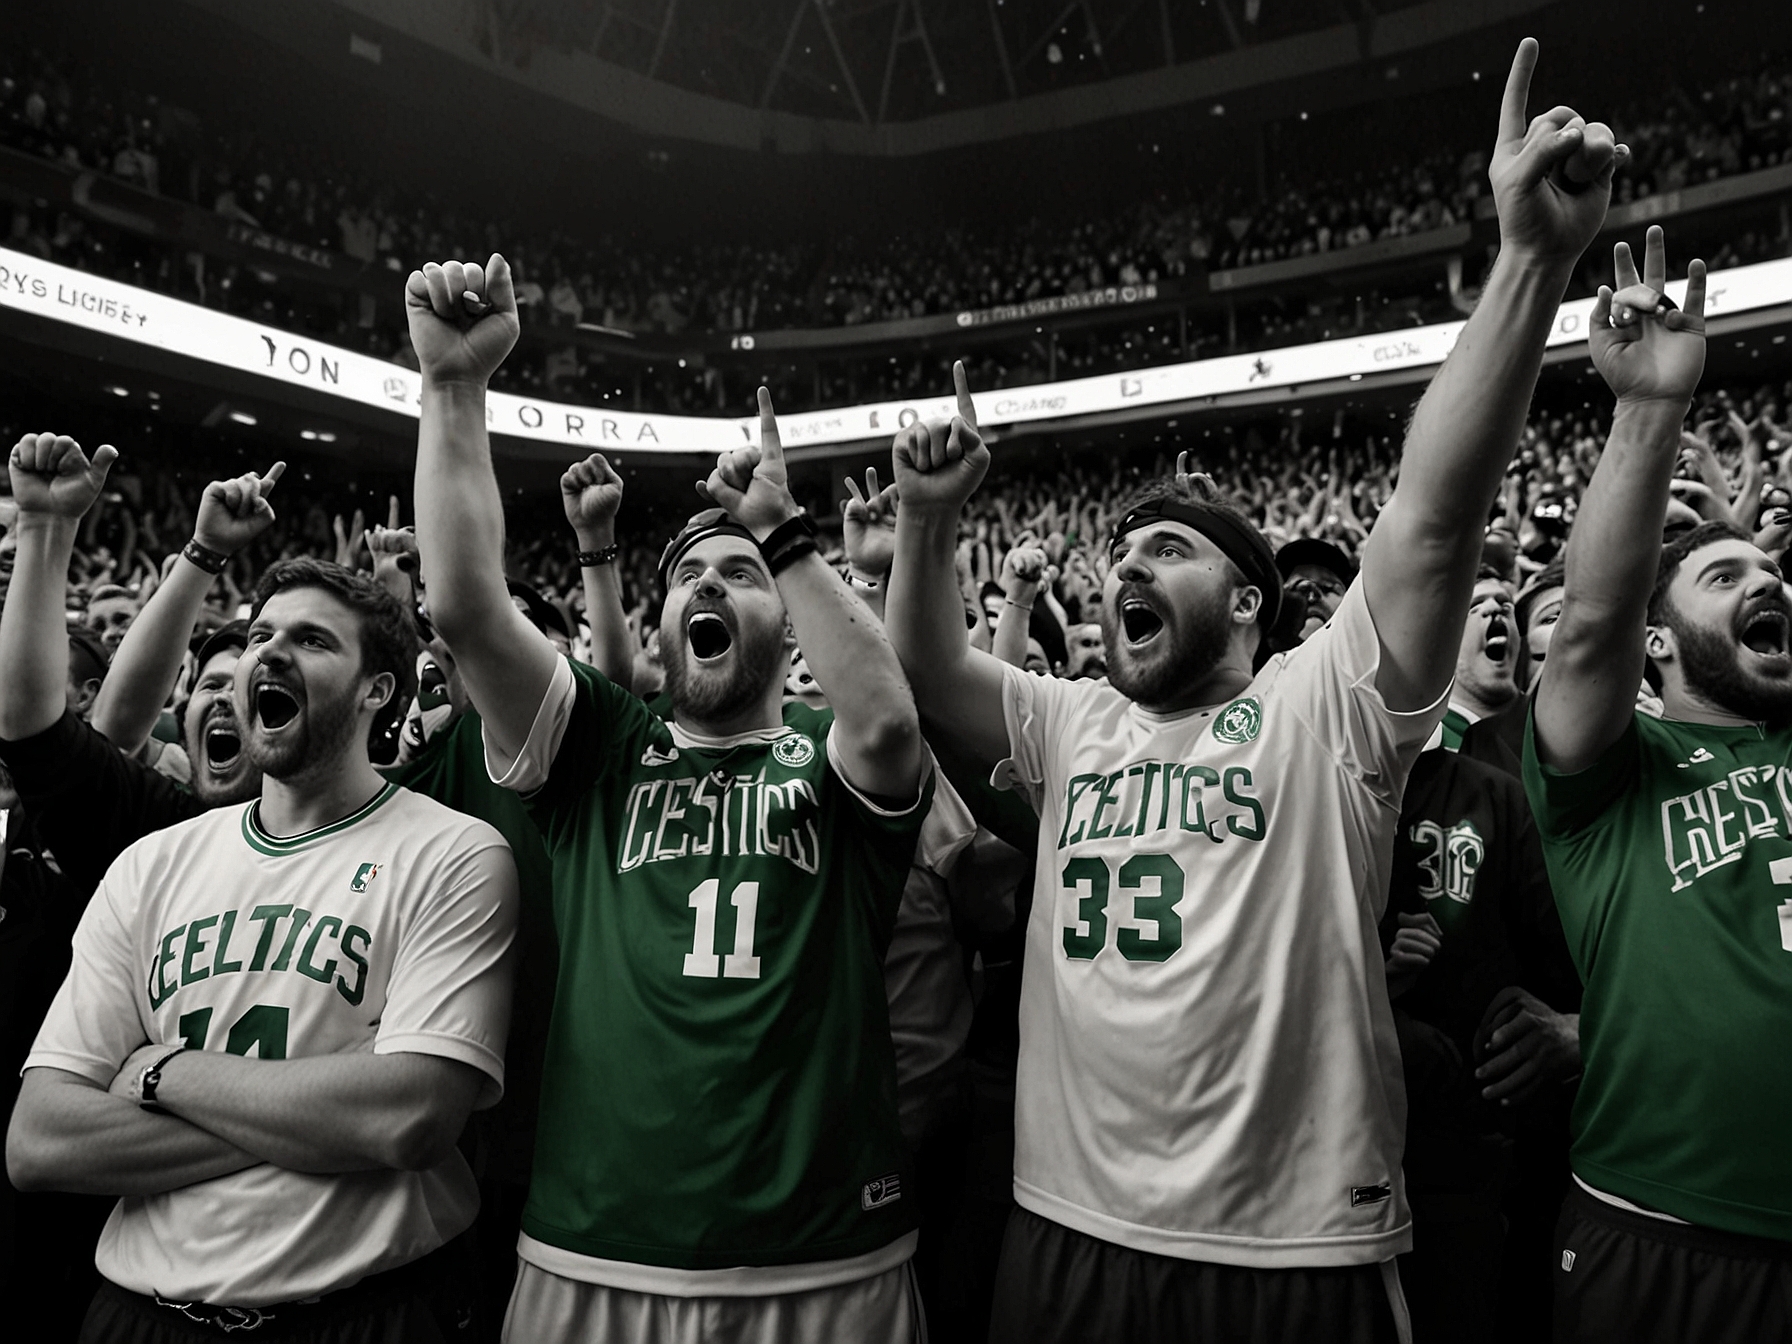 Celtics fans at TD Garden erupt in celebration as their team secures the 18th championship title. The arena was filled with excitement and pride, making it an unforgettable night for Boston supporters.